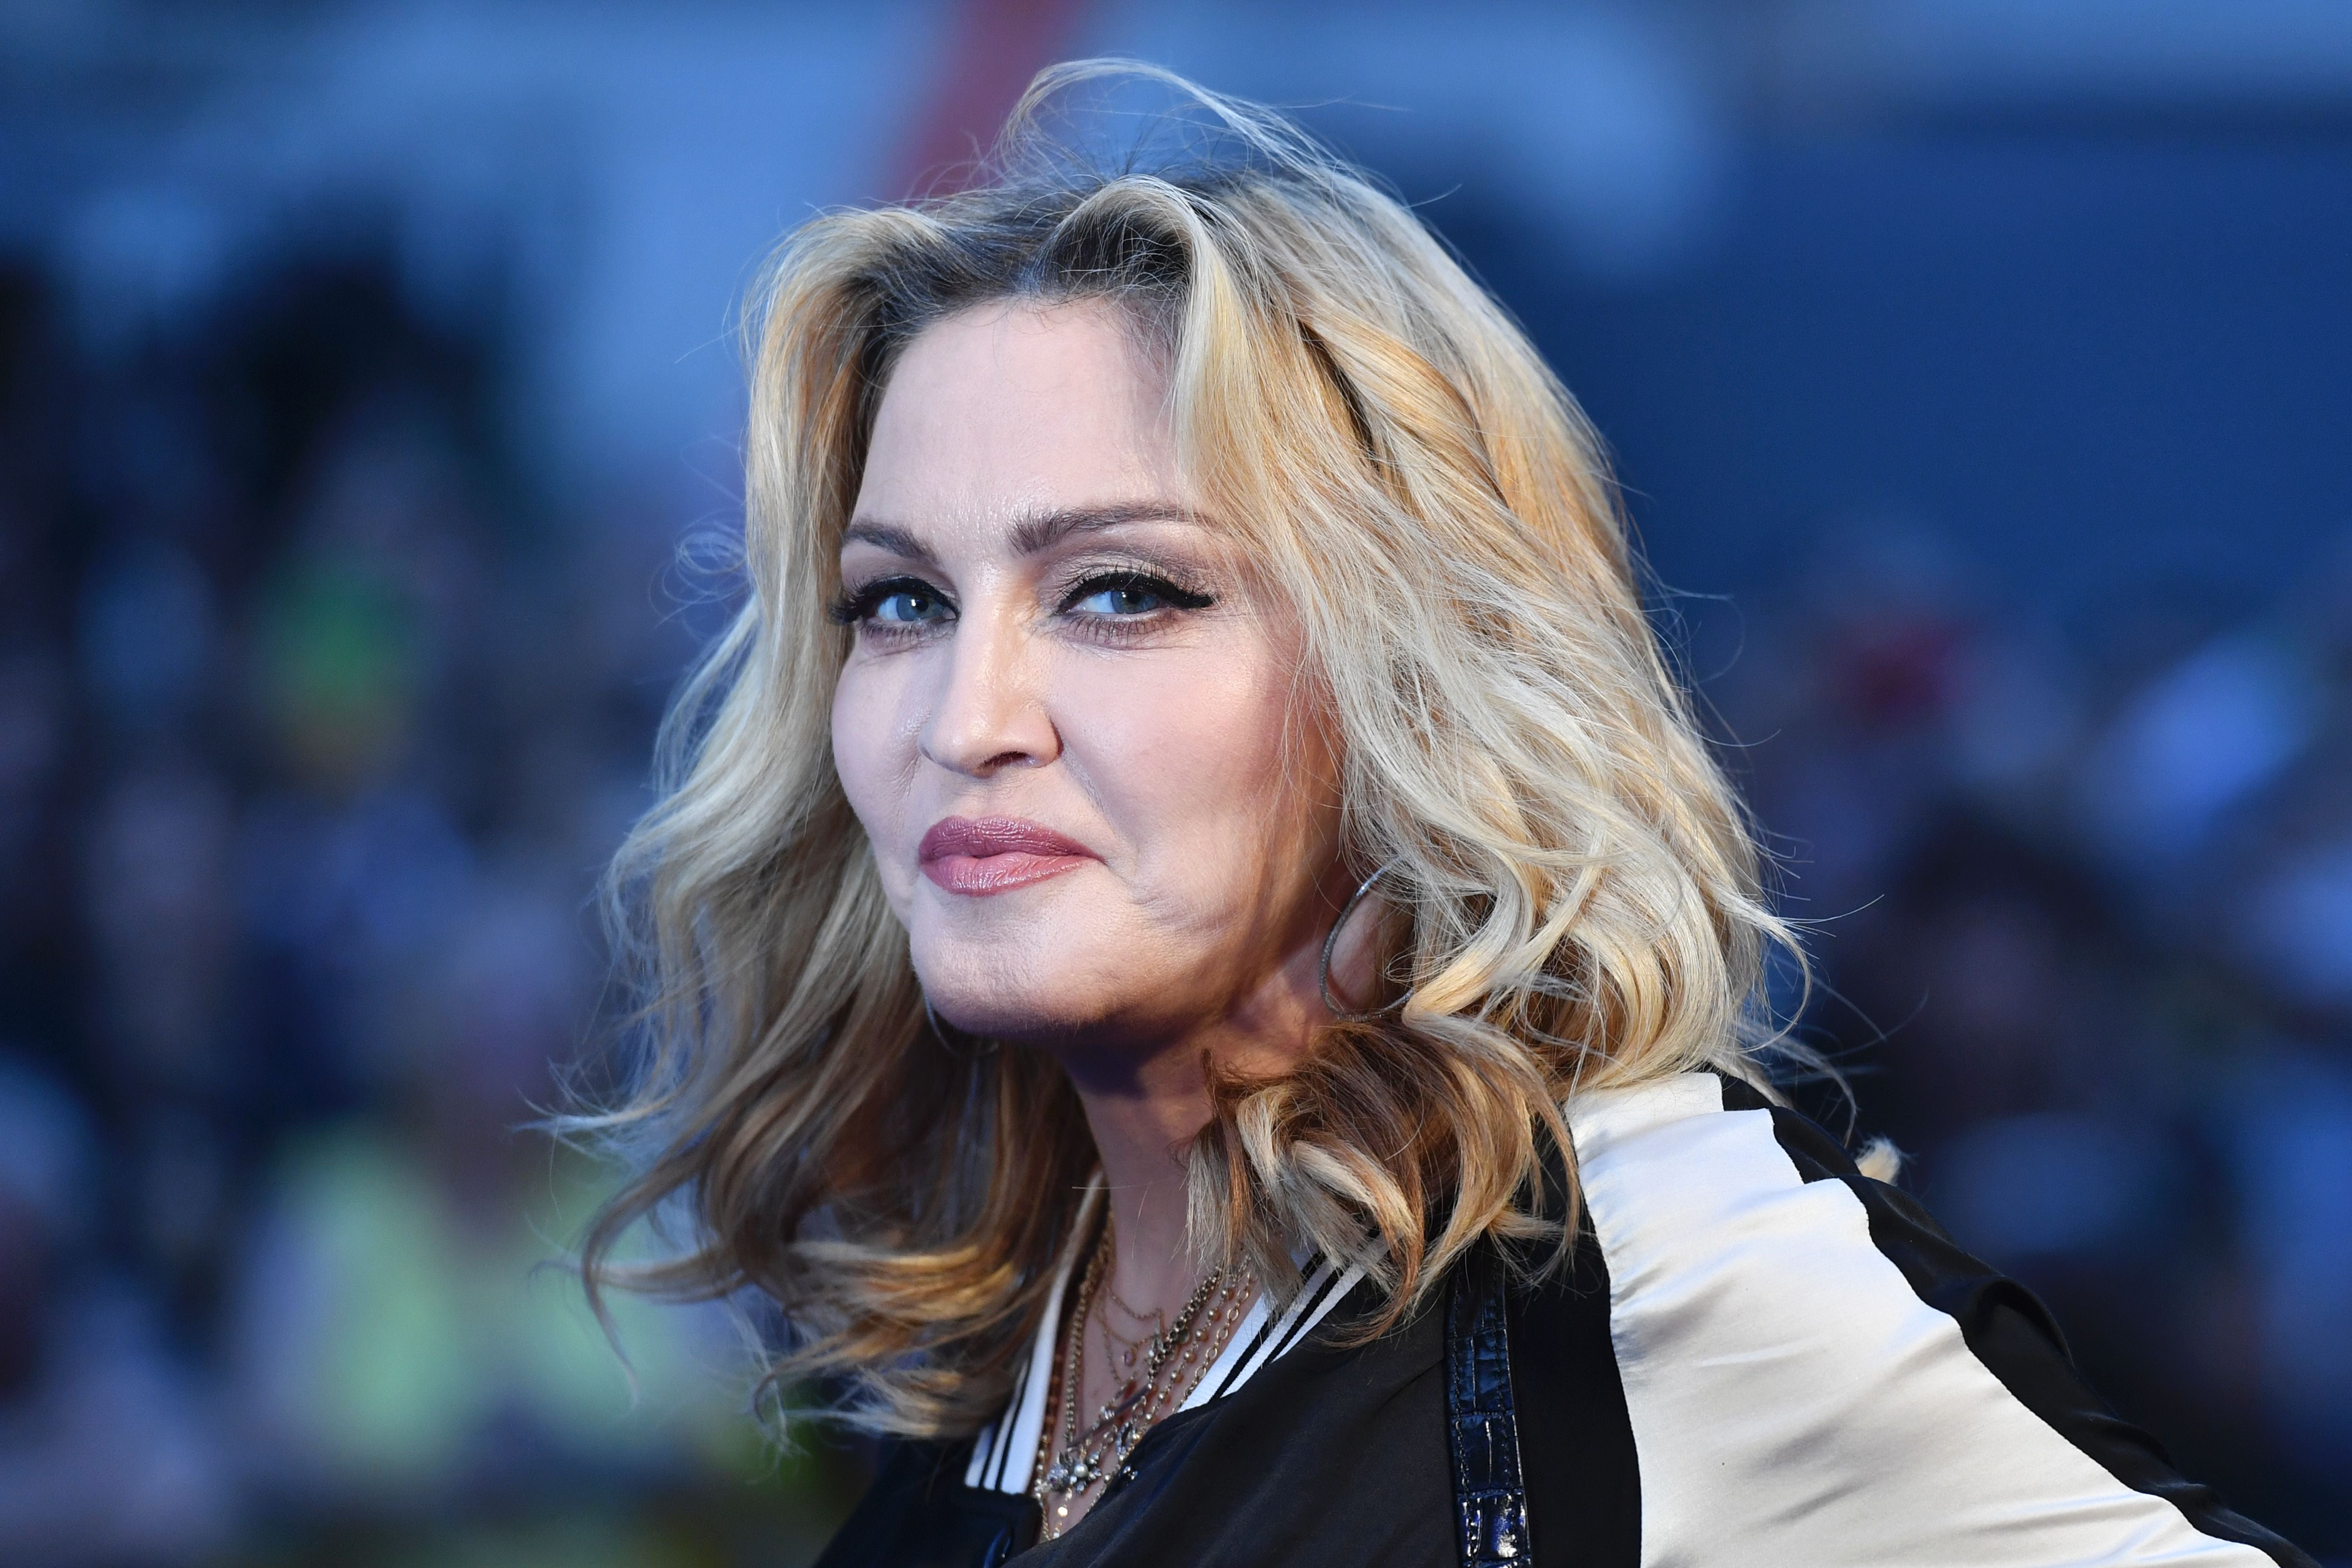 Madonna is working on her biopic